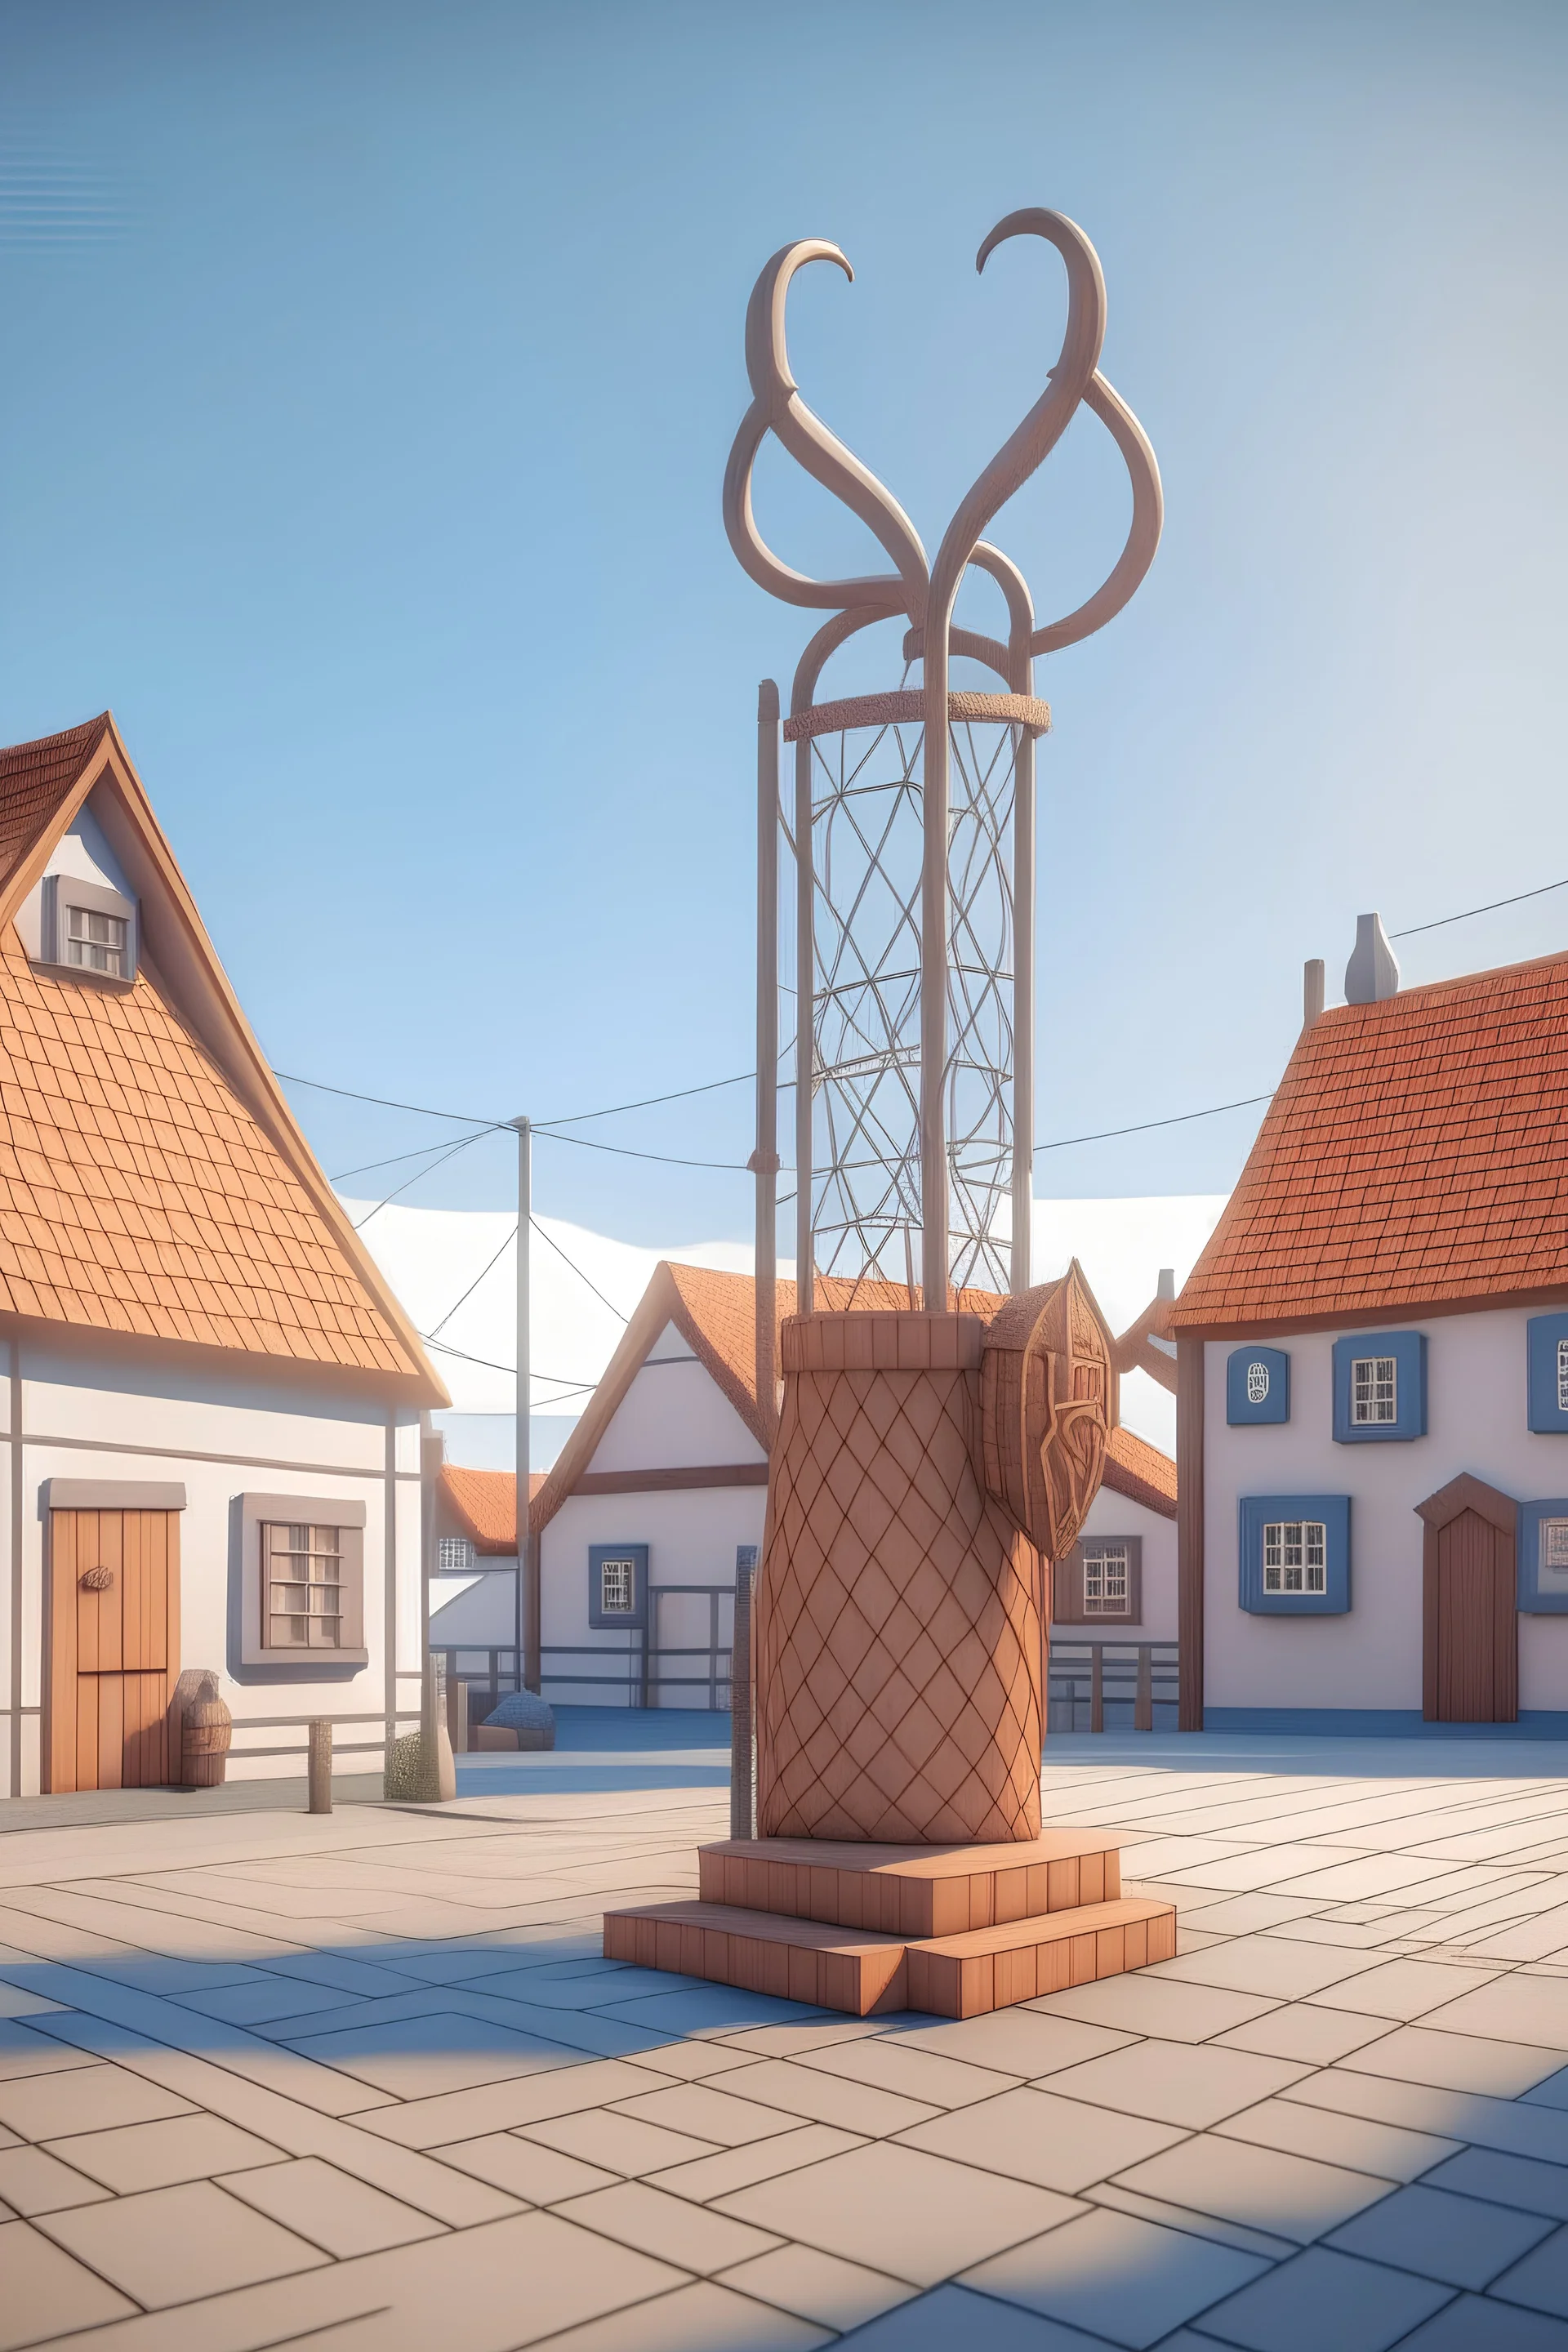 Basketball net in small danish town with Viking statue in ps2 low poly style